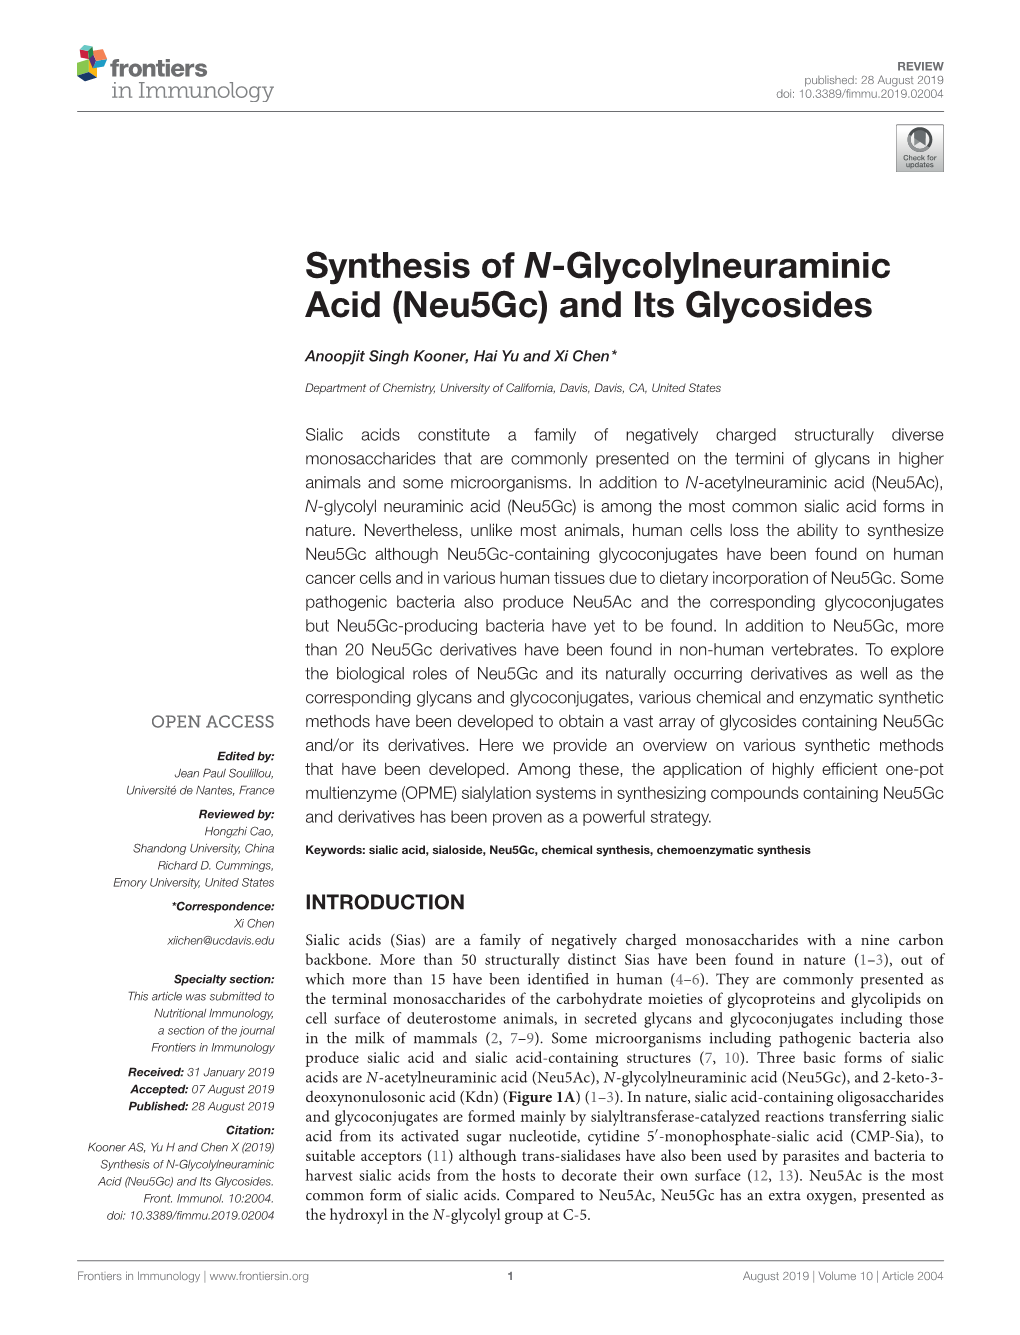 Synthesis of N-Glycolylneuraminic Acid (Neu5gc) and Its Glycosides